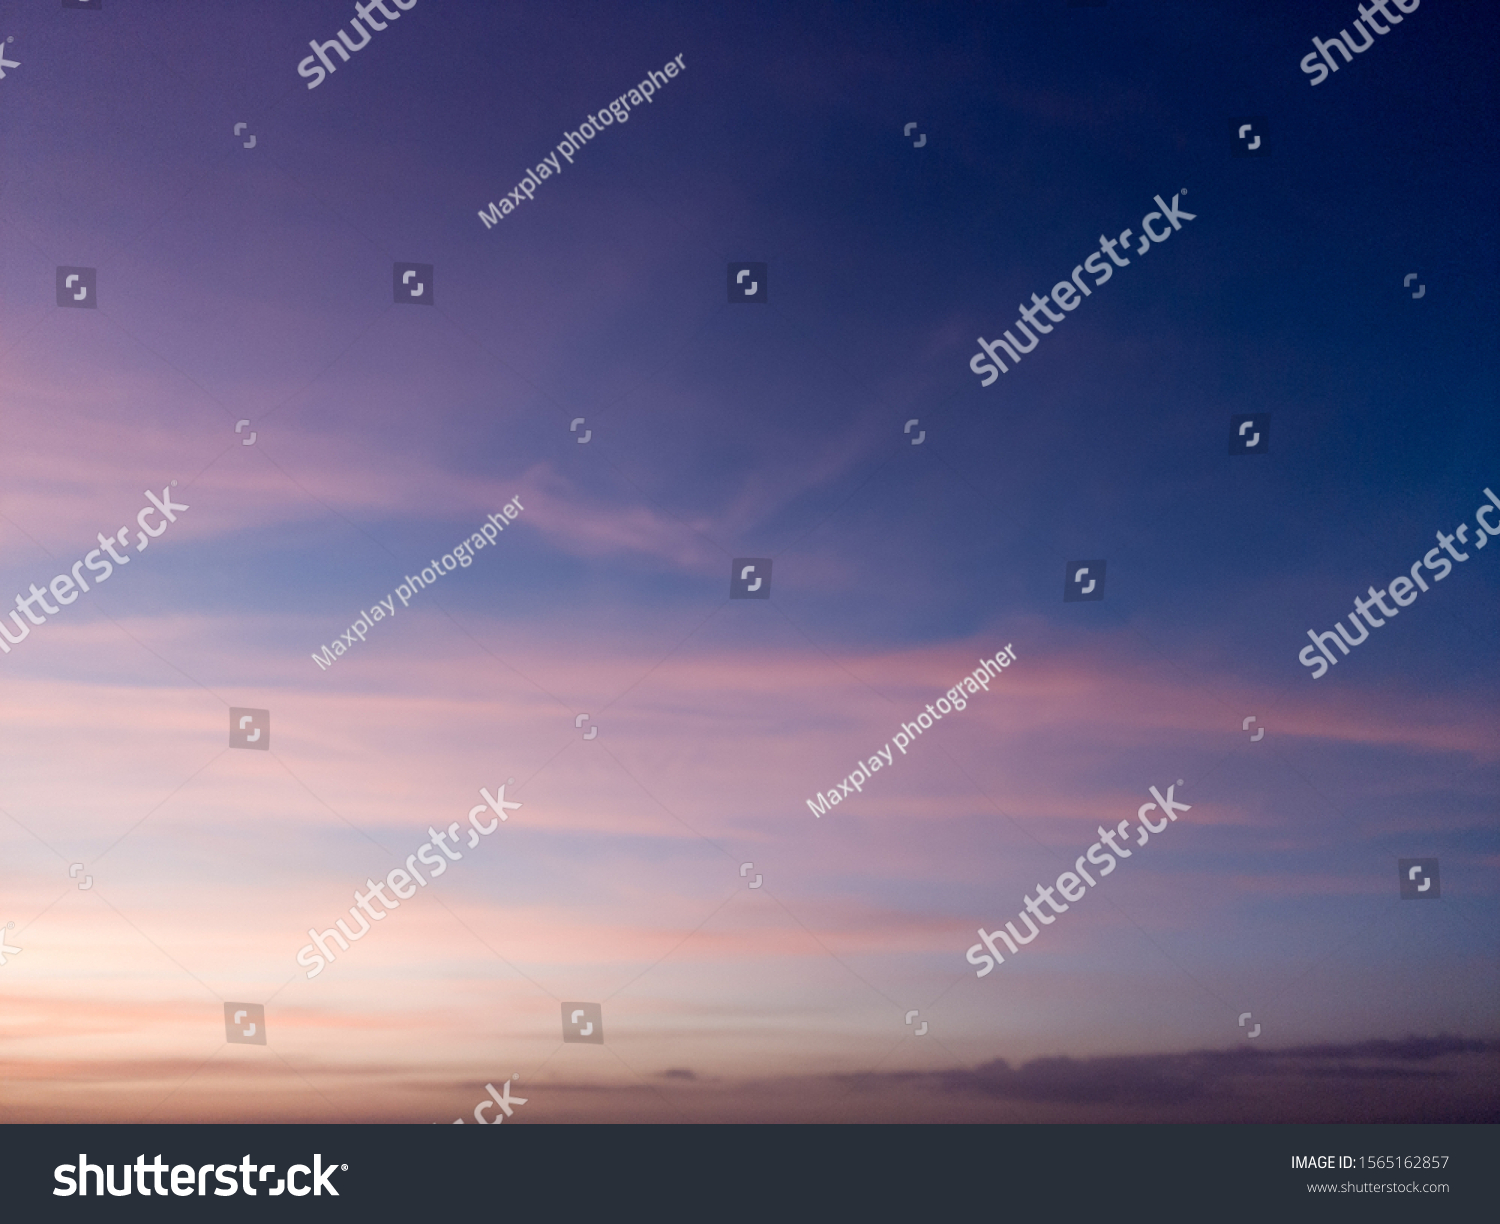 Natural colors Evening sky Shine new day for Heaven,The light from heaven from the sky is a mystery,In twilight golden atmosphere,Modern sheet structure design, #1565162857